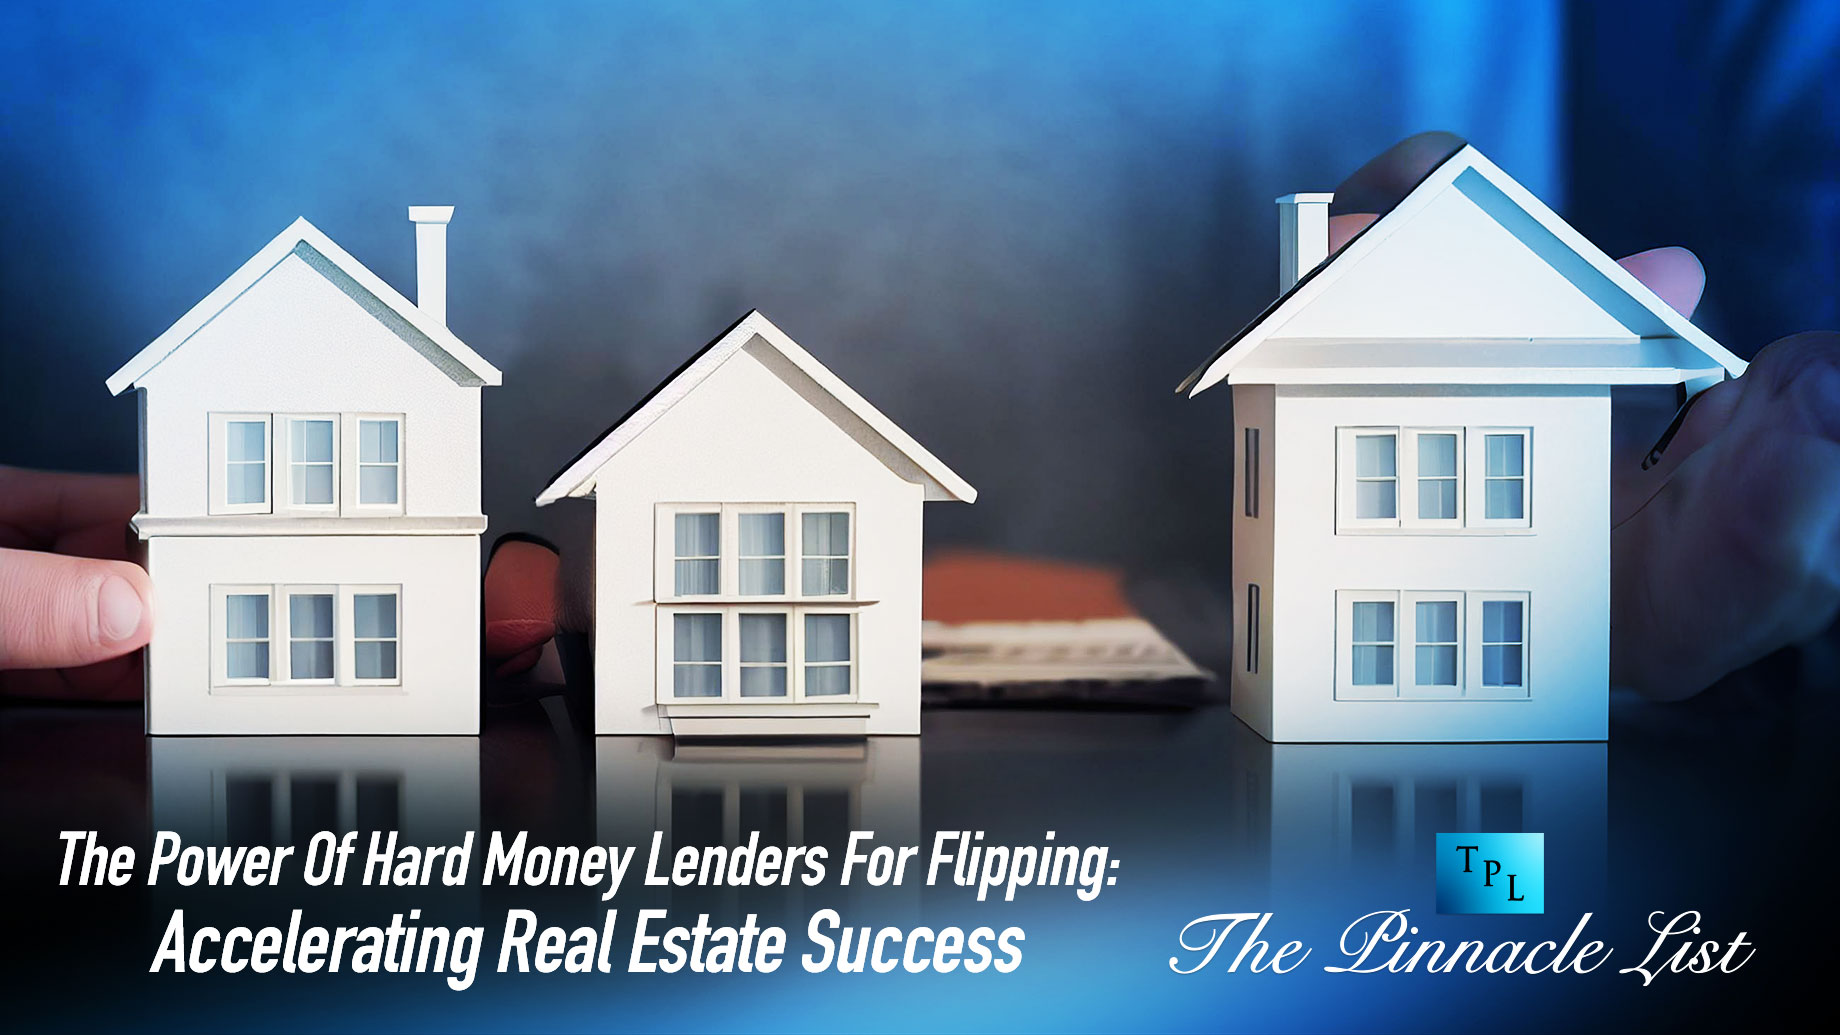 The Power Of Hard Money Lenders For Flipping: Accelerating Real Estate Success